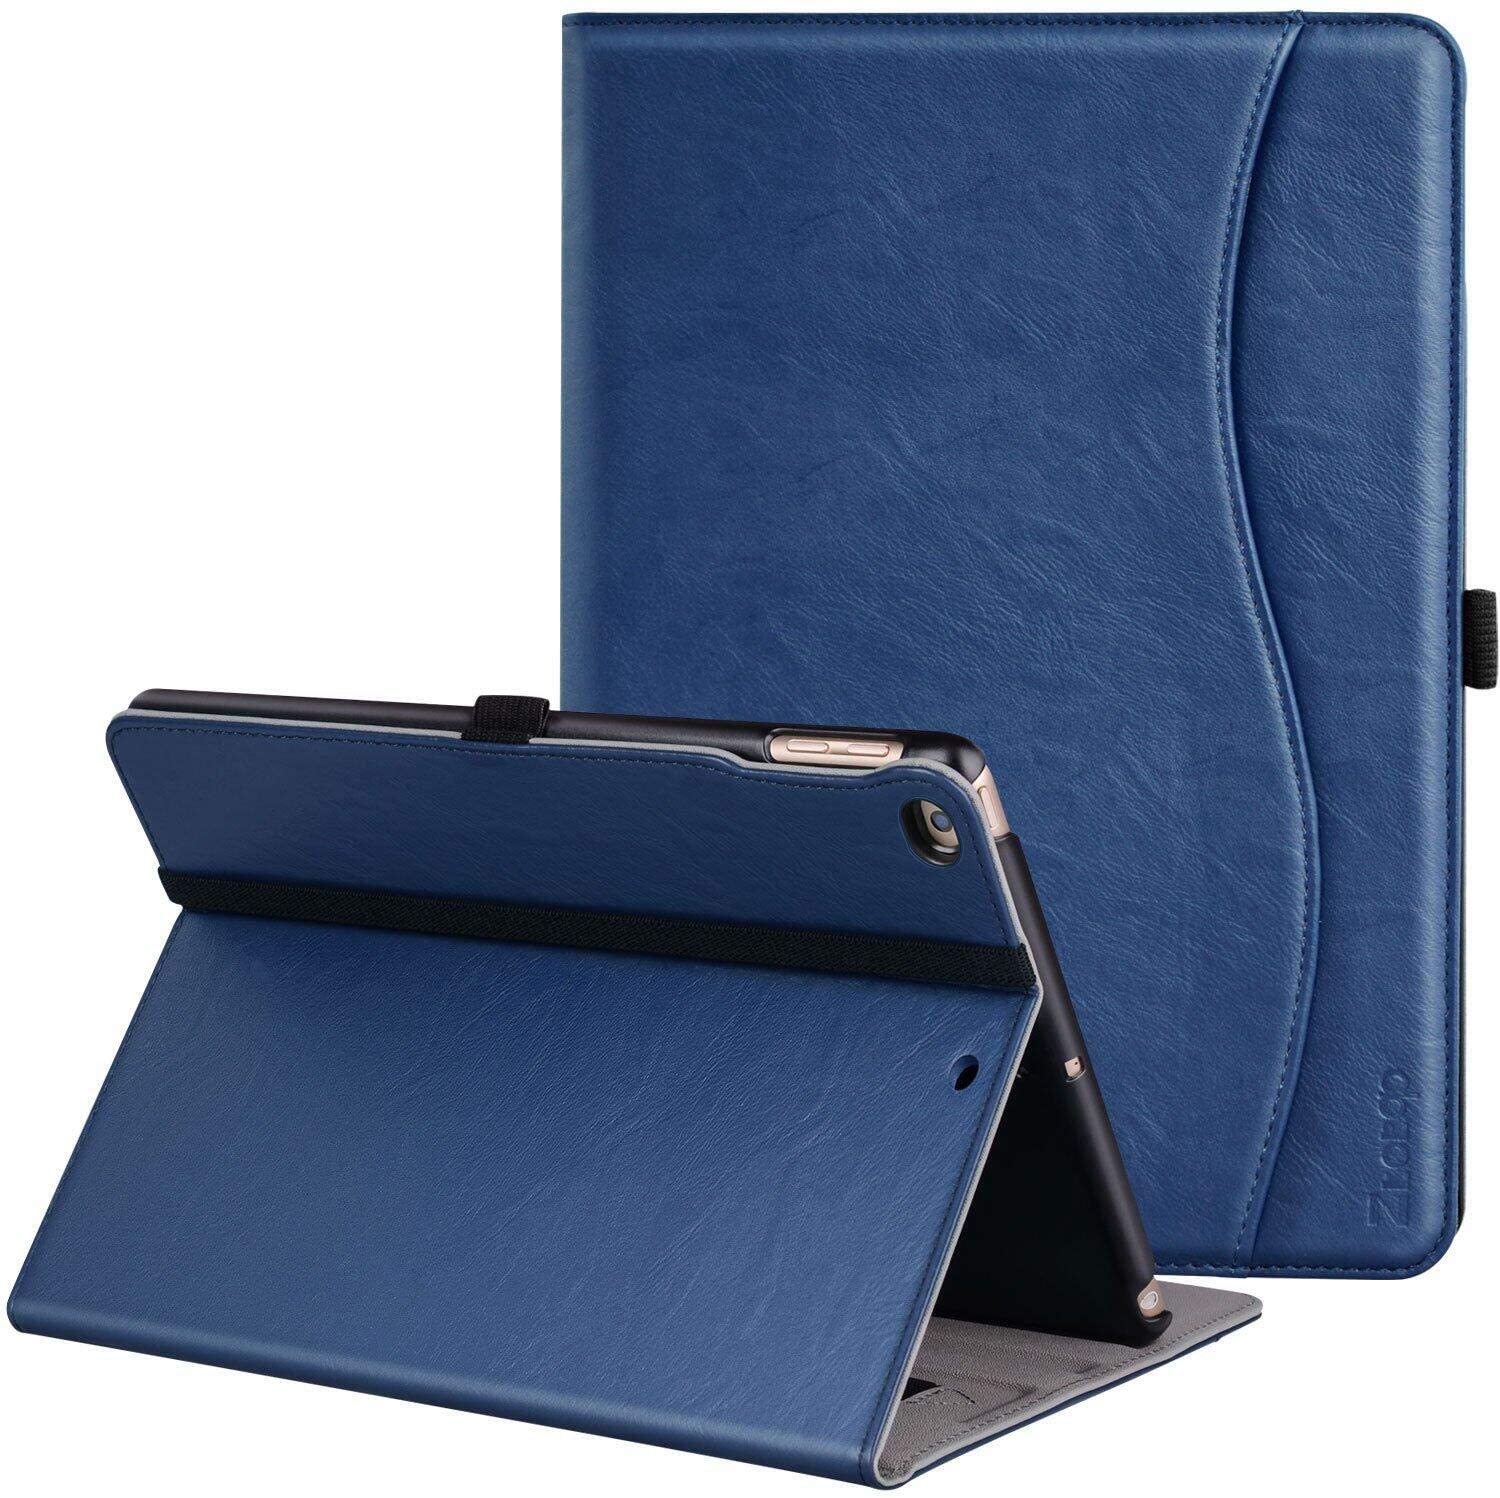 Ztotop Case for New iPad Mini 5/iPad Mini 4, Premium Leather Business Slim Folding Stand Folio Cover with Auto Wake/Sleep,Pencil Holder and Multiple Viewing Angles,NavyBlue - e4cents